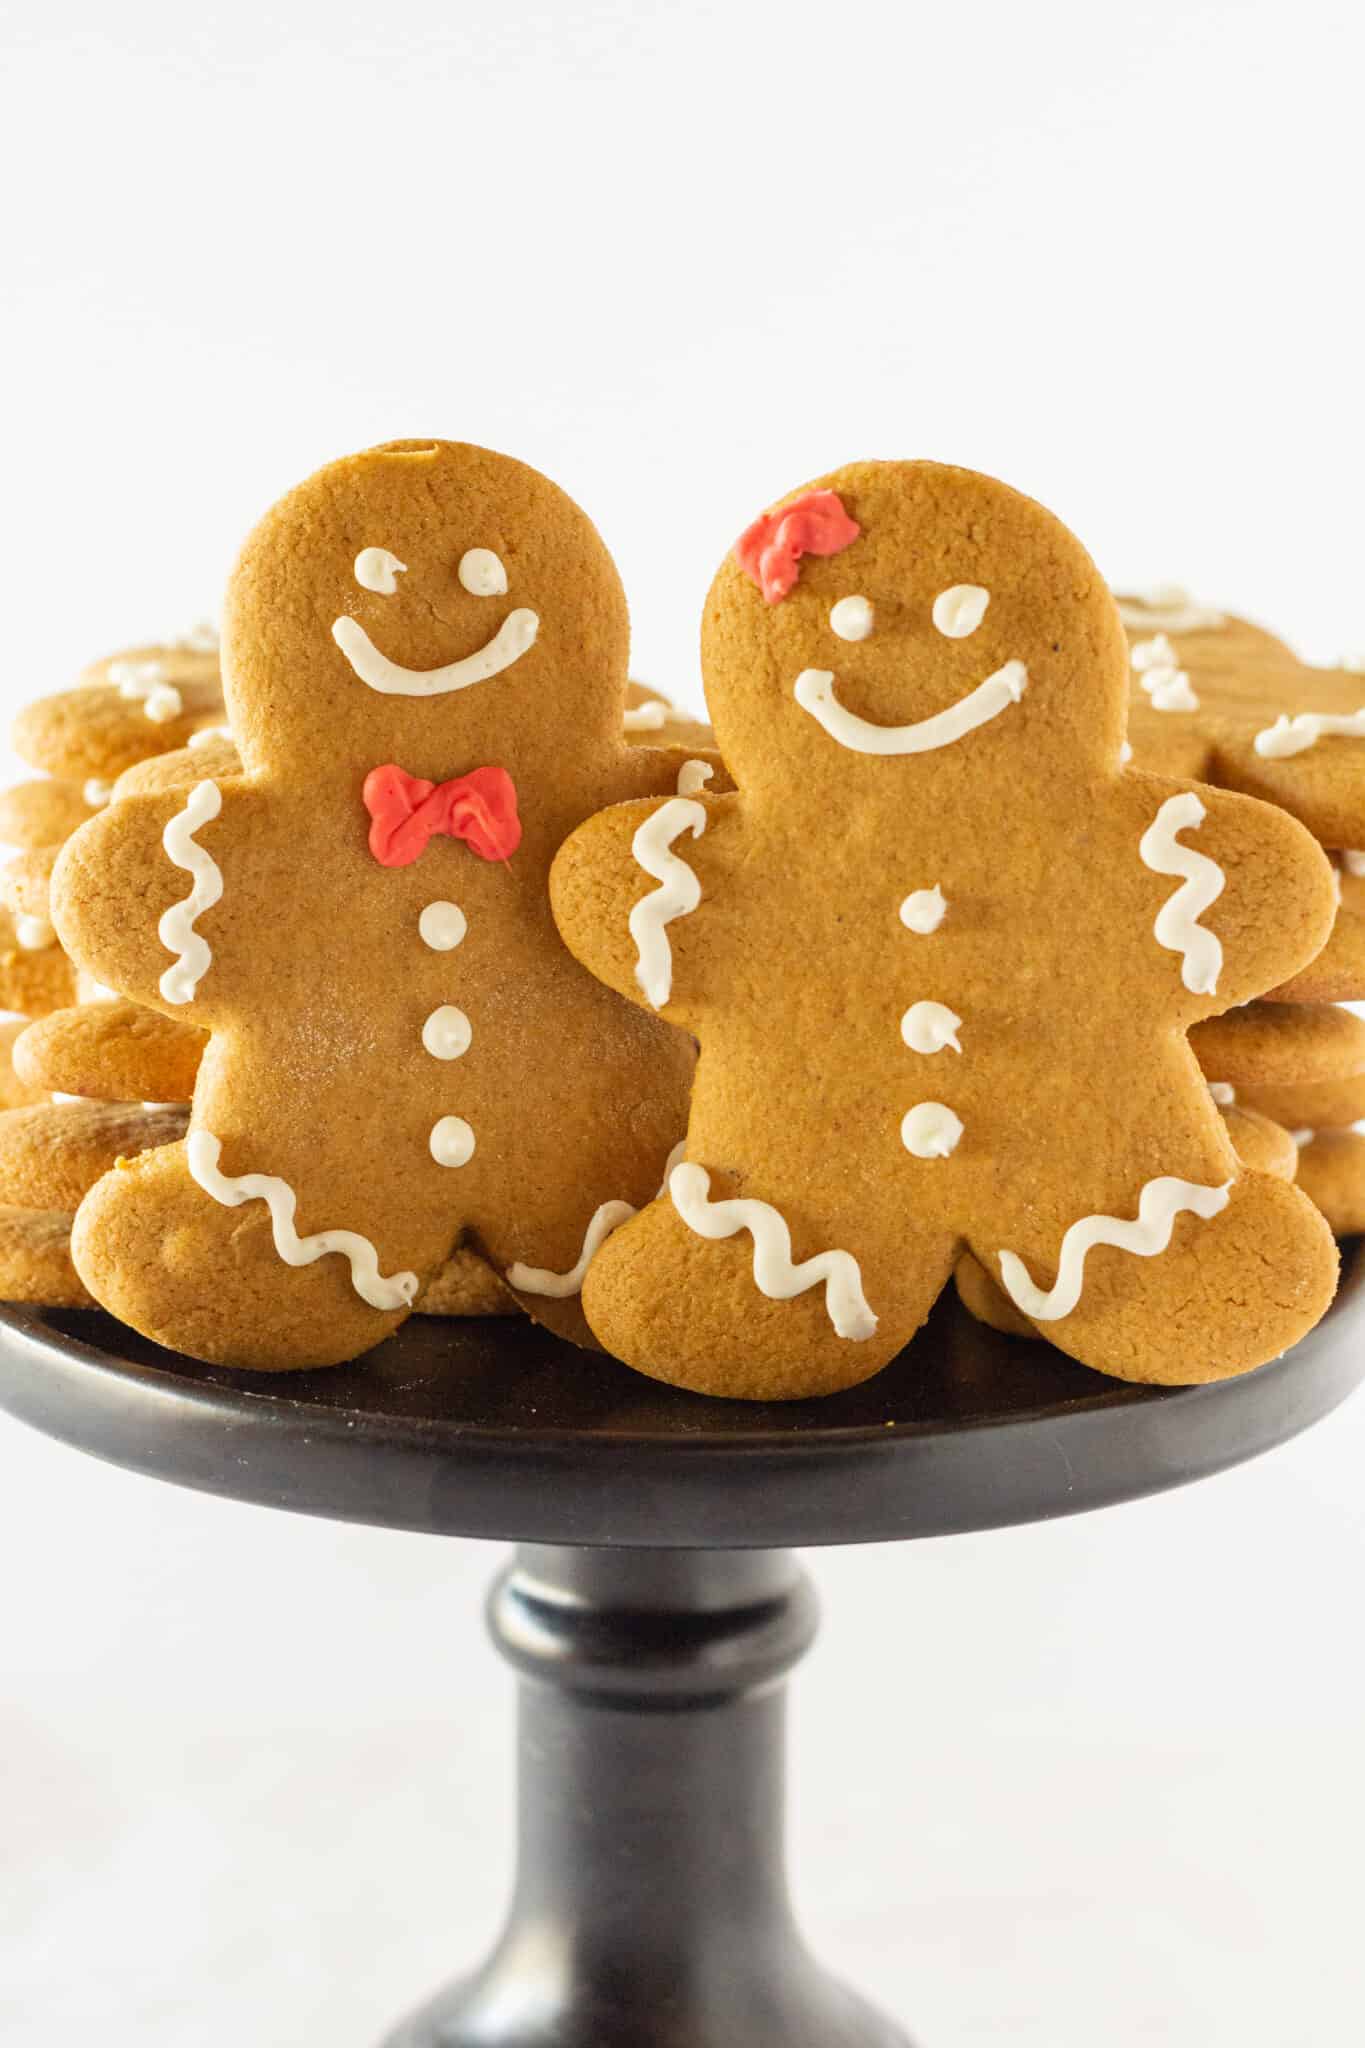 Easy and Delicious Christmas Cookies Recipes for the Holidays featured by top US cookie blog, Practically Homemade: Gingerbread Men Cookies